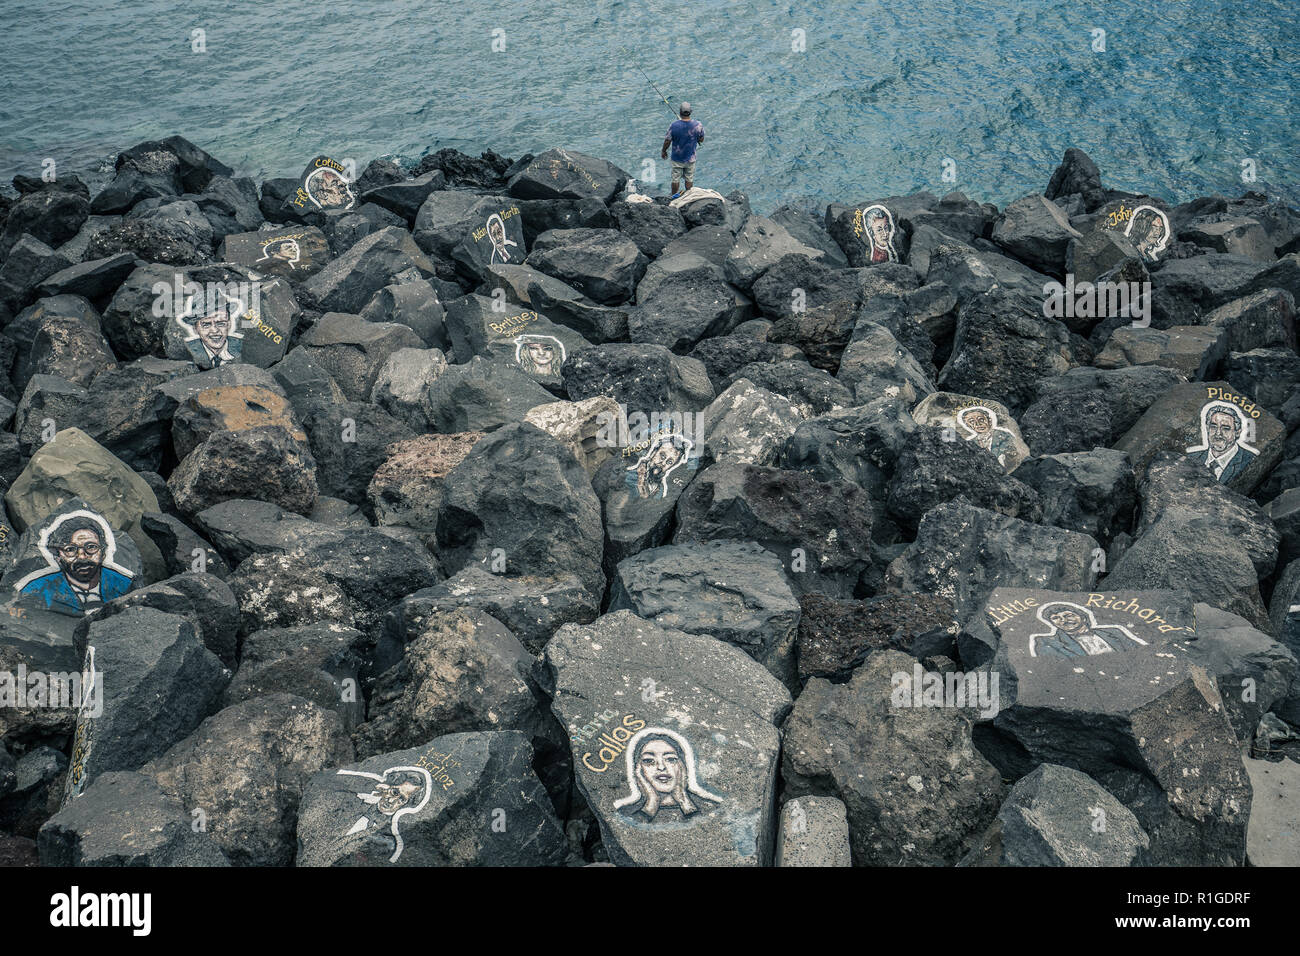 TENERIFE, SPAIN – May 30, 2018: Rocks with painting portraits of famous musicians near Auditorio de Tenerife. Stock Photo